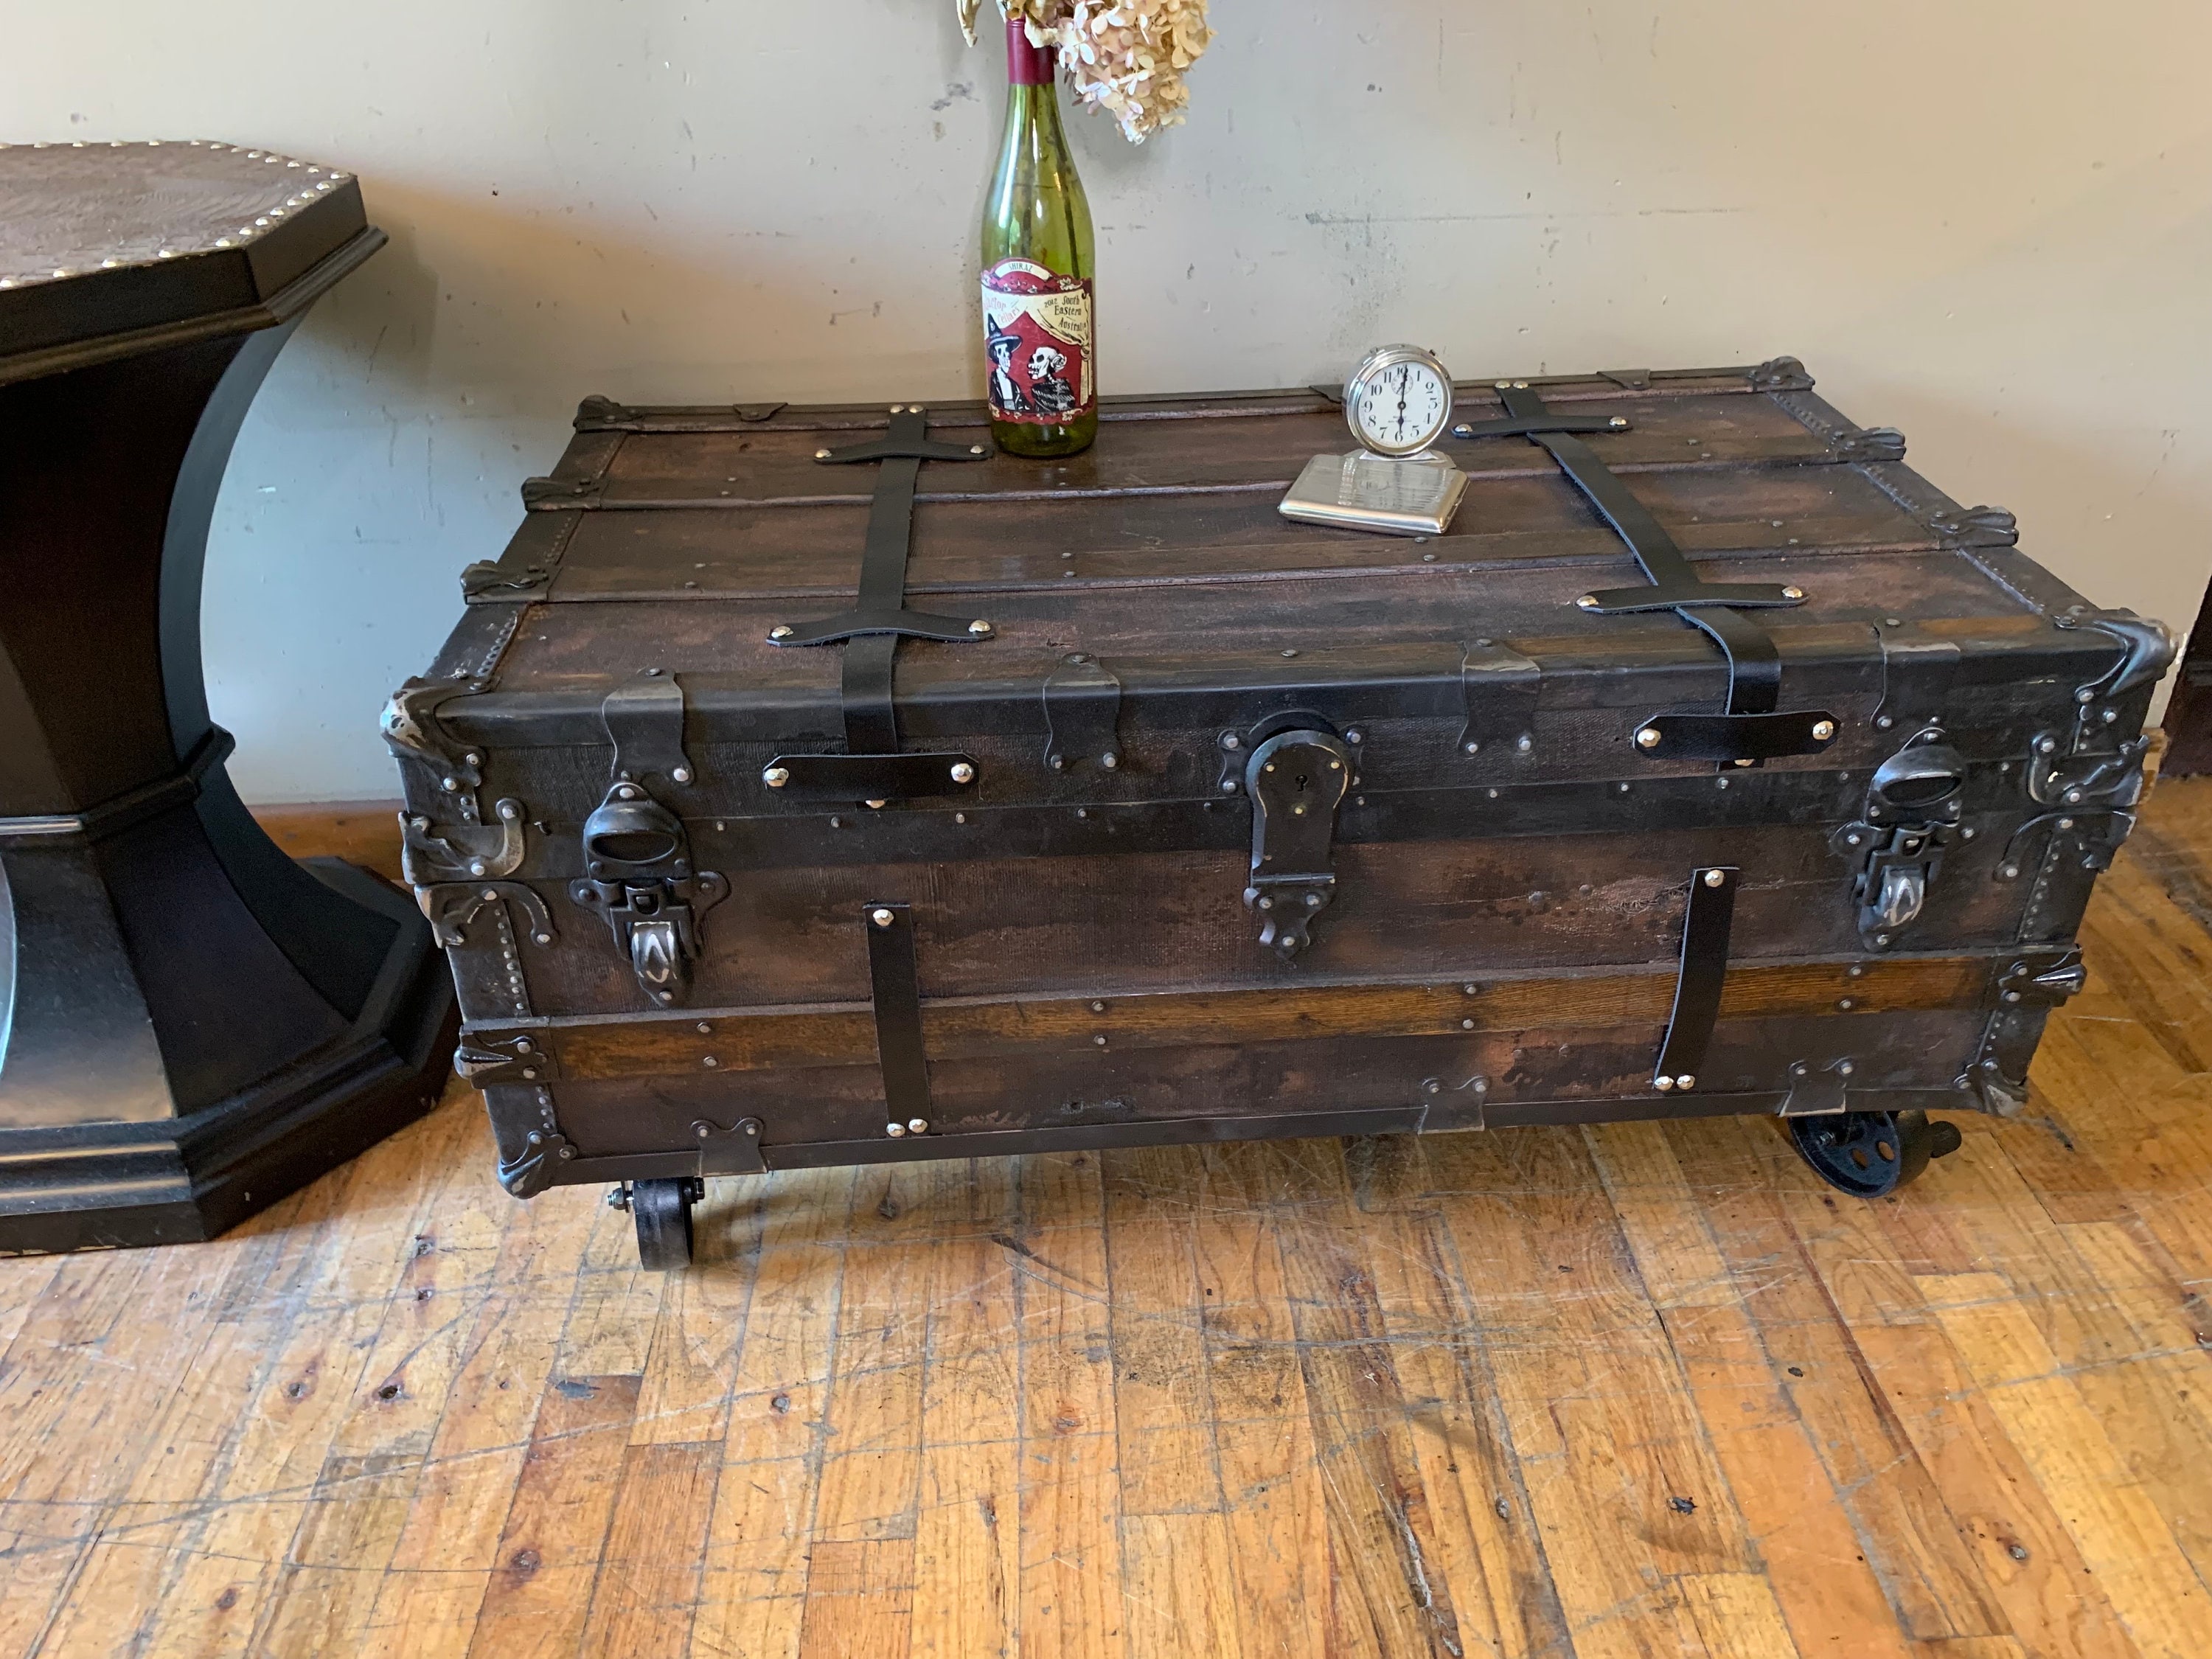 Source Antique Vintage Furniture Aluminum Storage Trunk Coffee Table on  m.